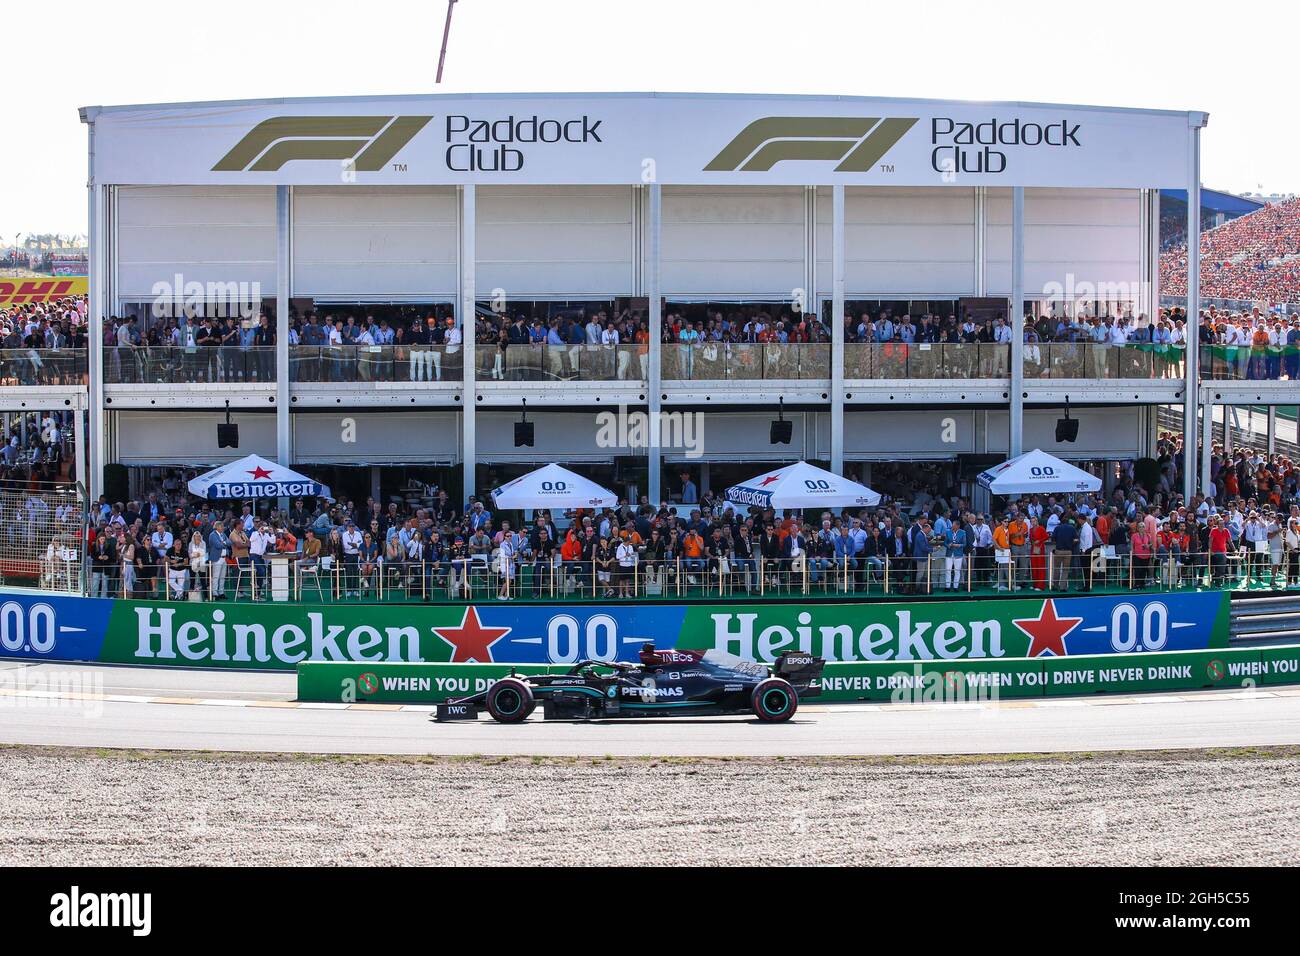 Paddock club f1 hi-res stock photography and images - Alamy